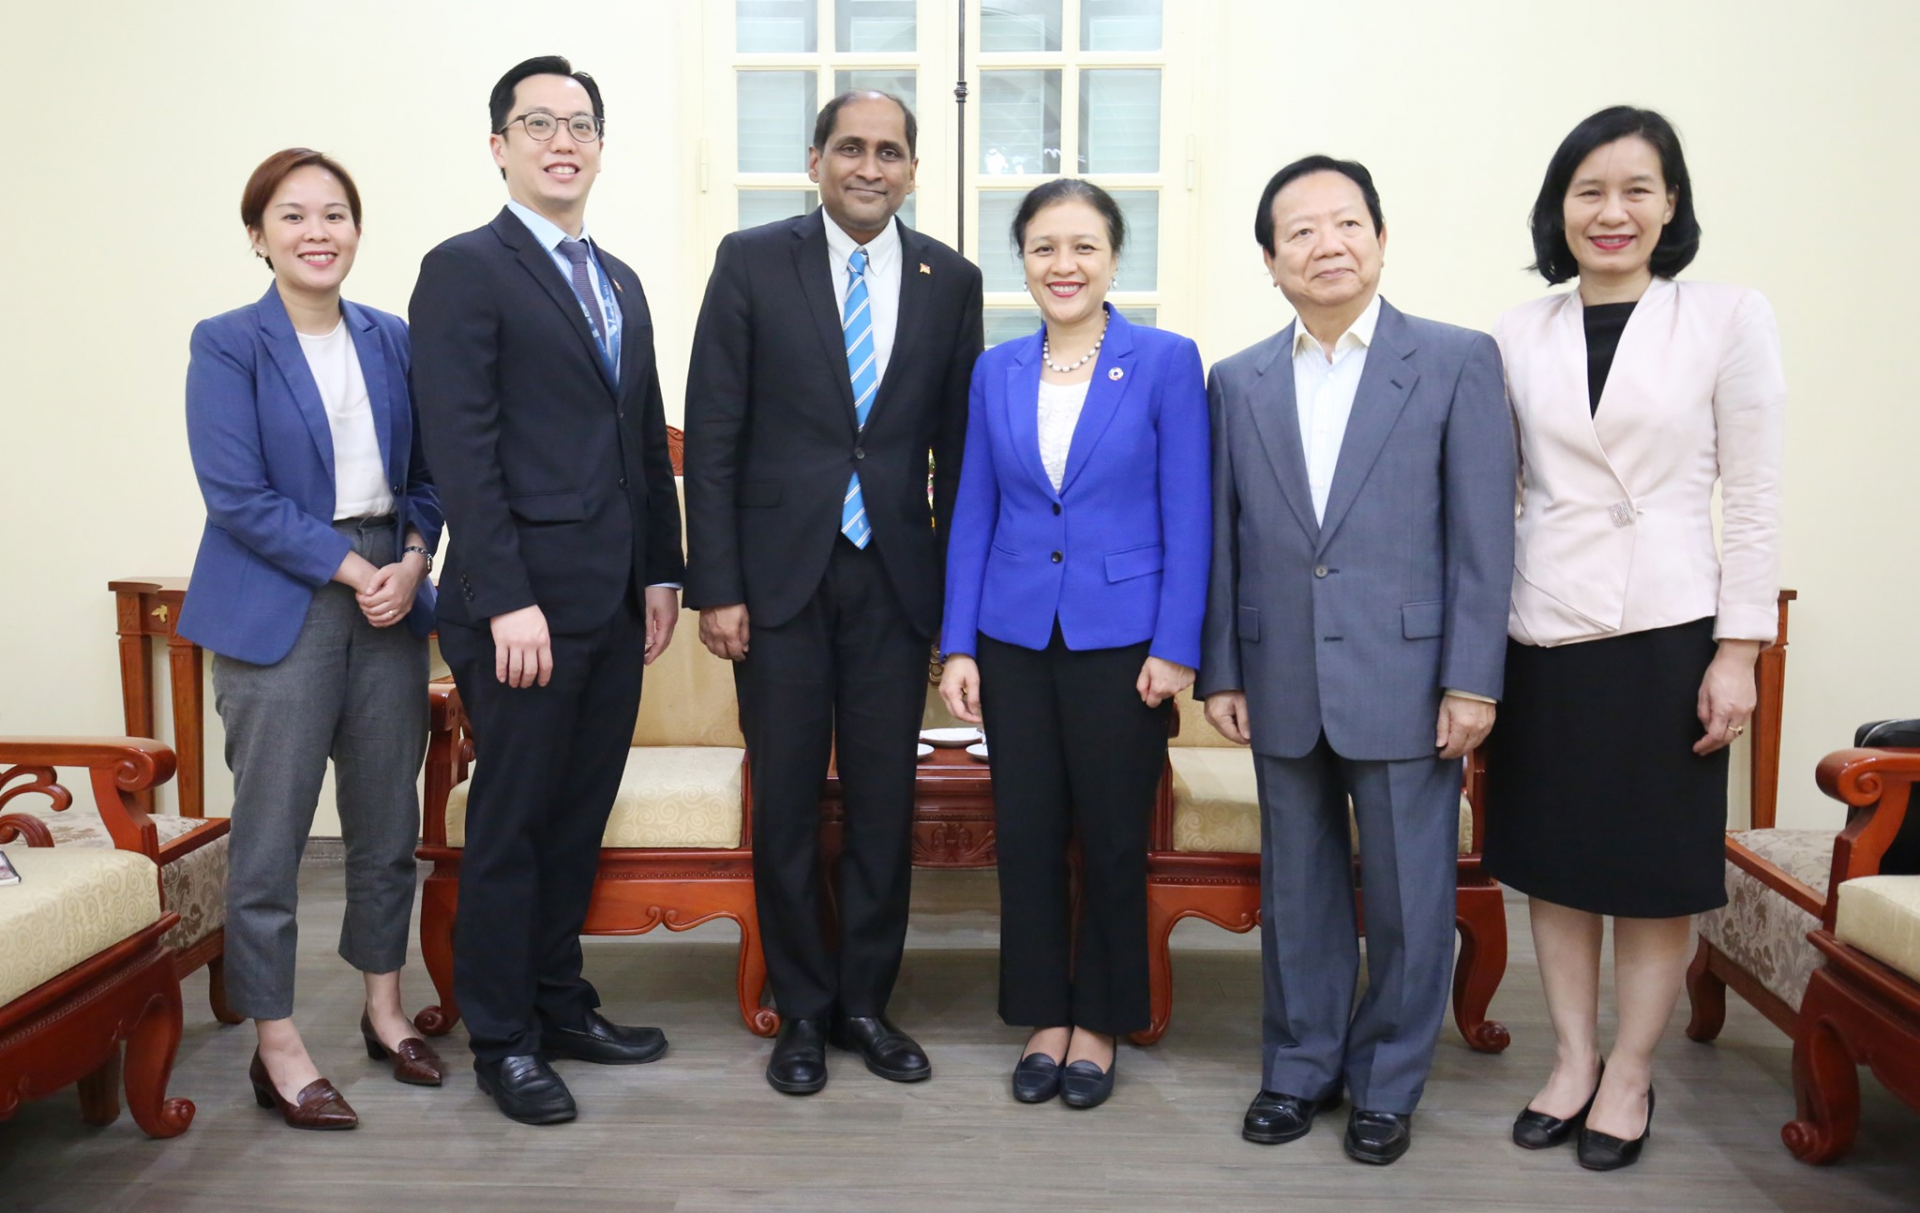 Newly appointed singaporean ambassador to pay a courtesy visit the vufo president